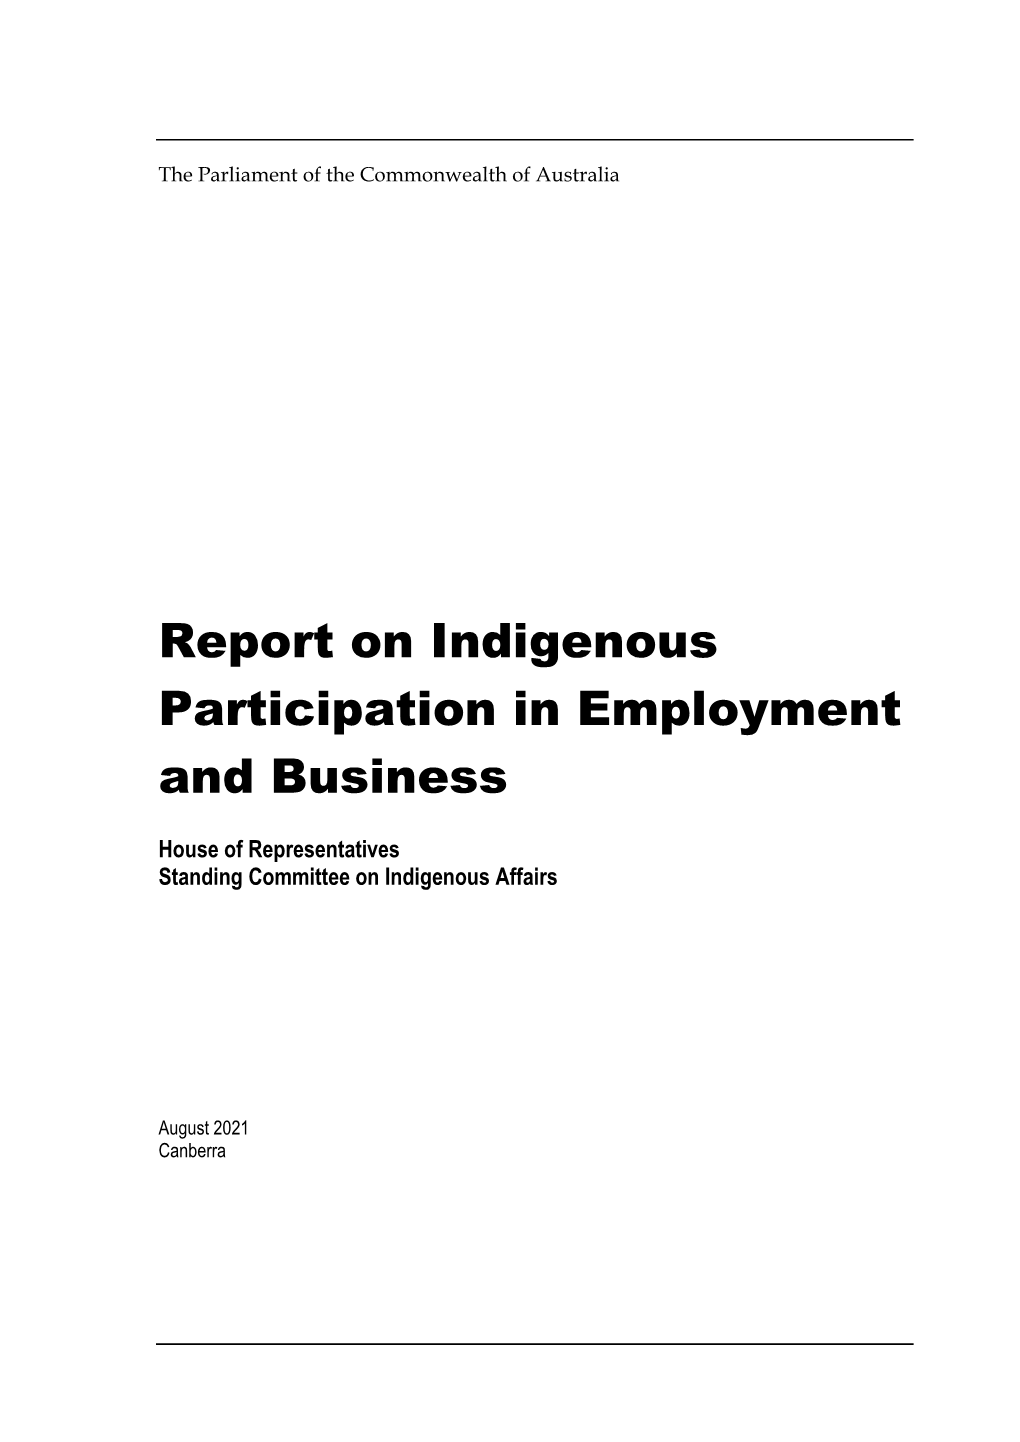 Report on Indigenous Participation in Employment and Business